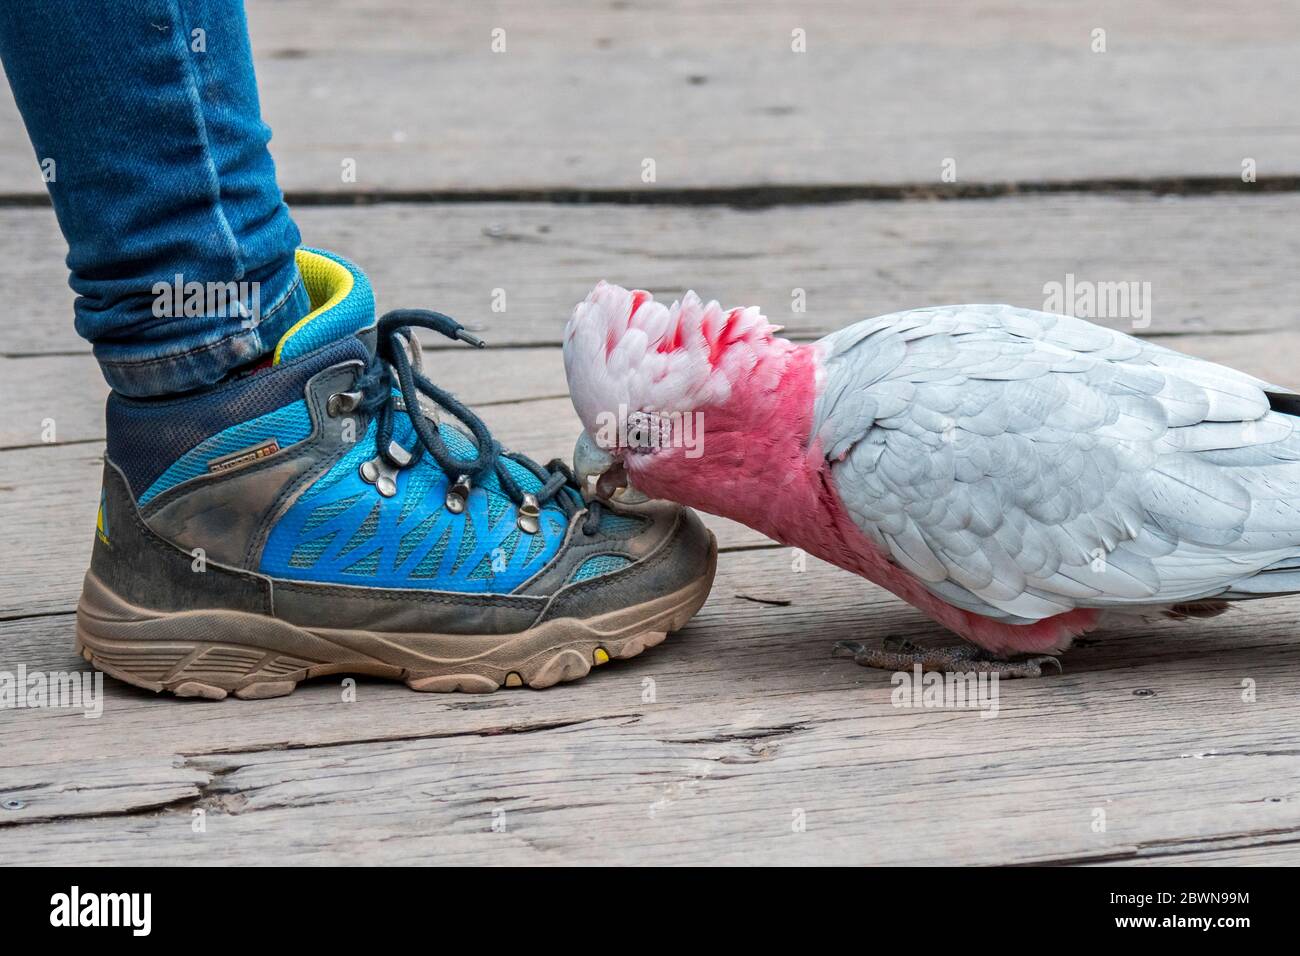 Curious galah / pink and grey cockatoo (Eolophus roseicapilla), native to Australia, pecking at shoelaces / shoe-strings of tourist's colourful shoe Stock Photo